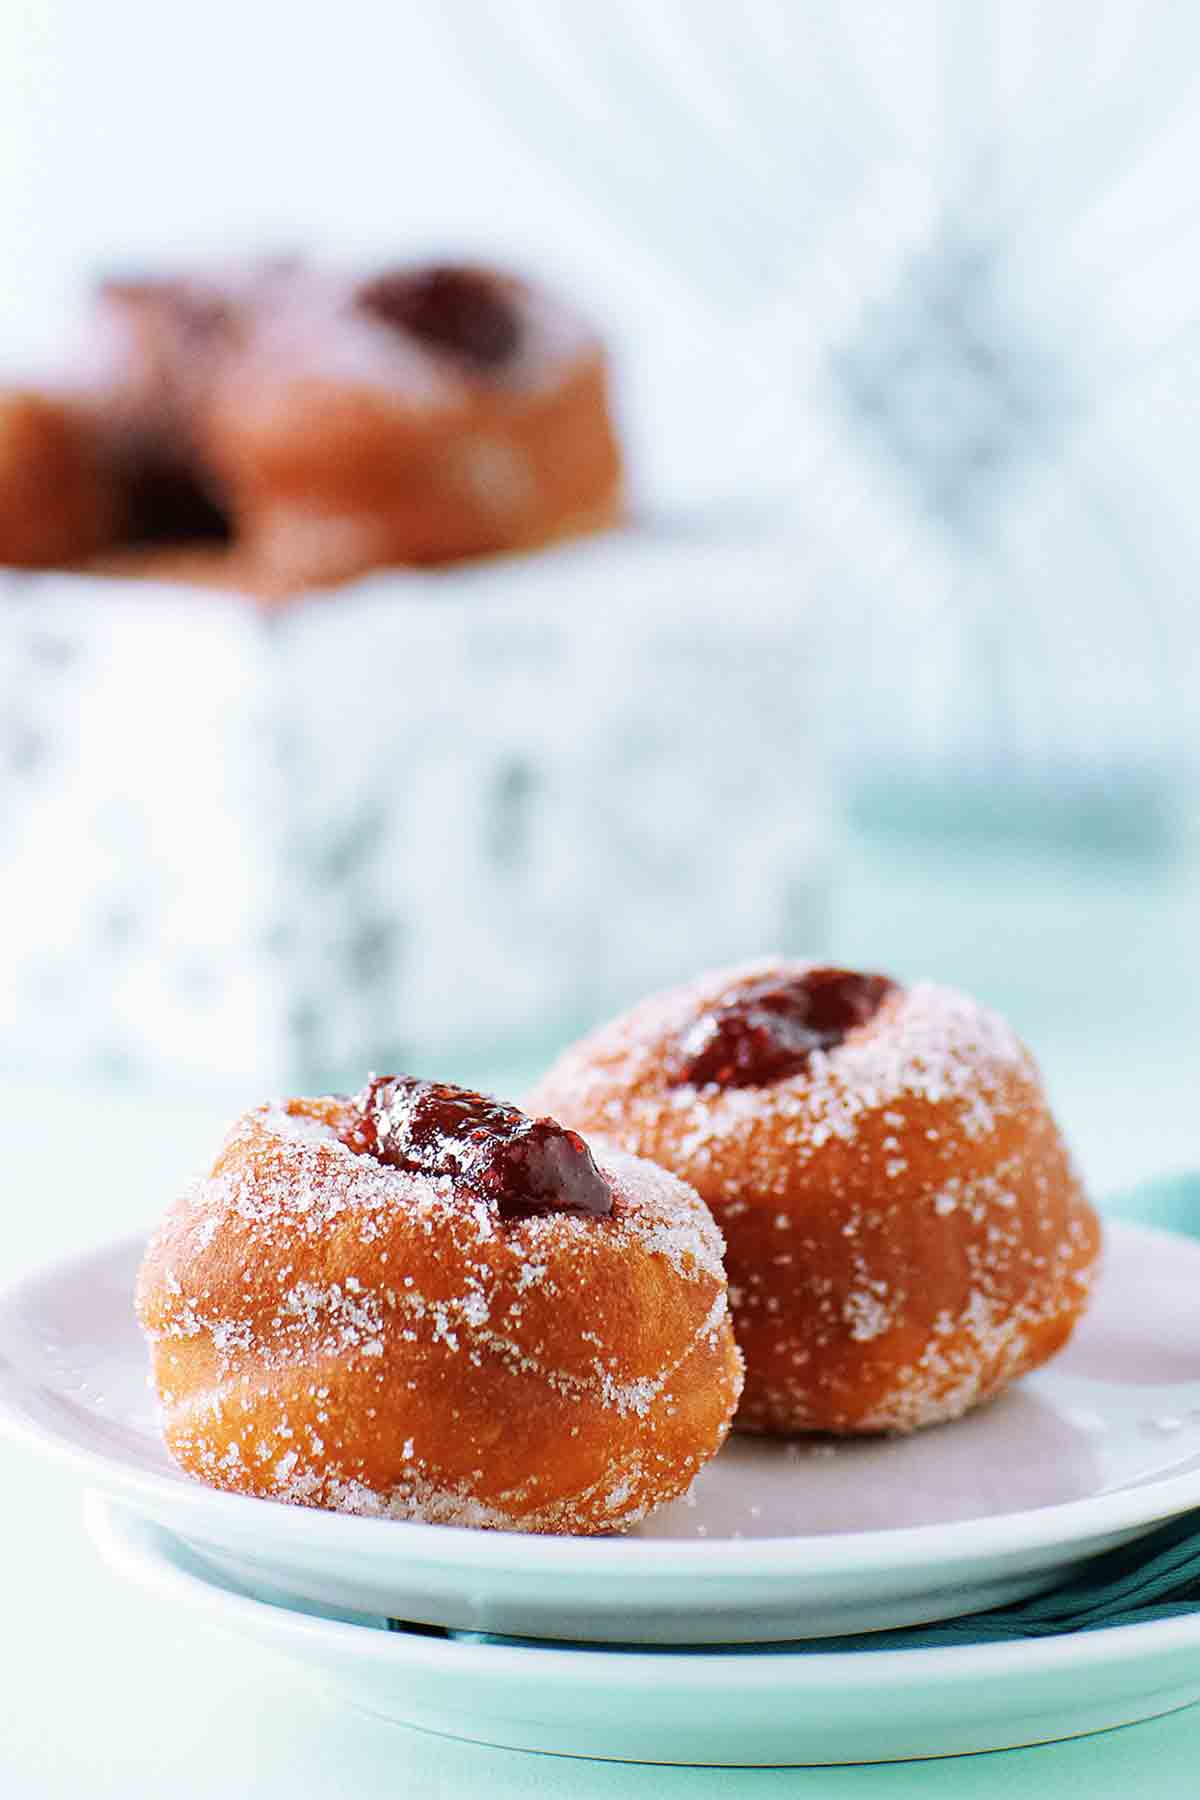 A white plate with two jelly-filled sufganiyot doughnuts.